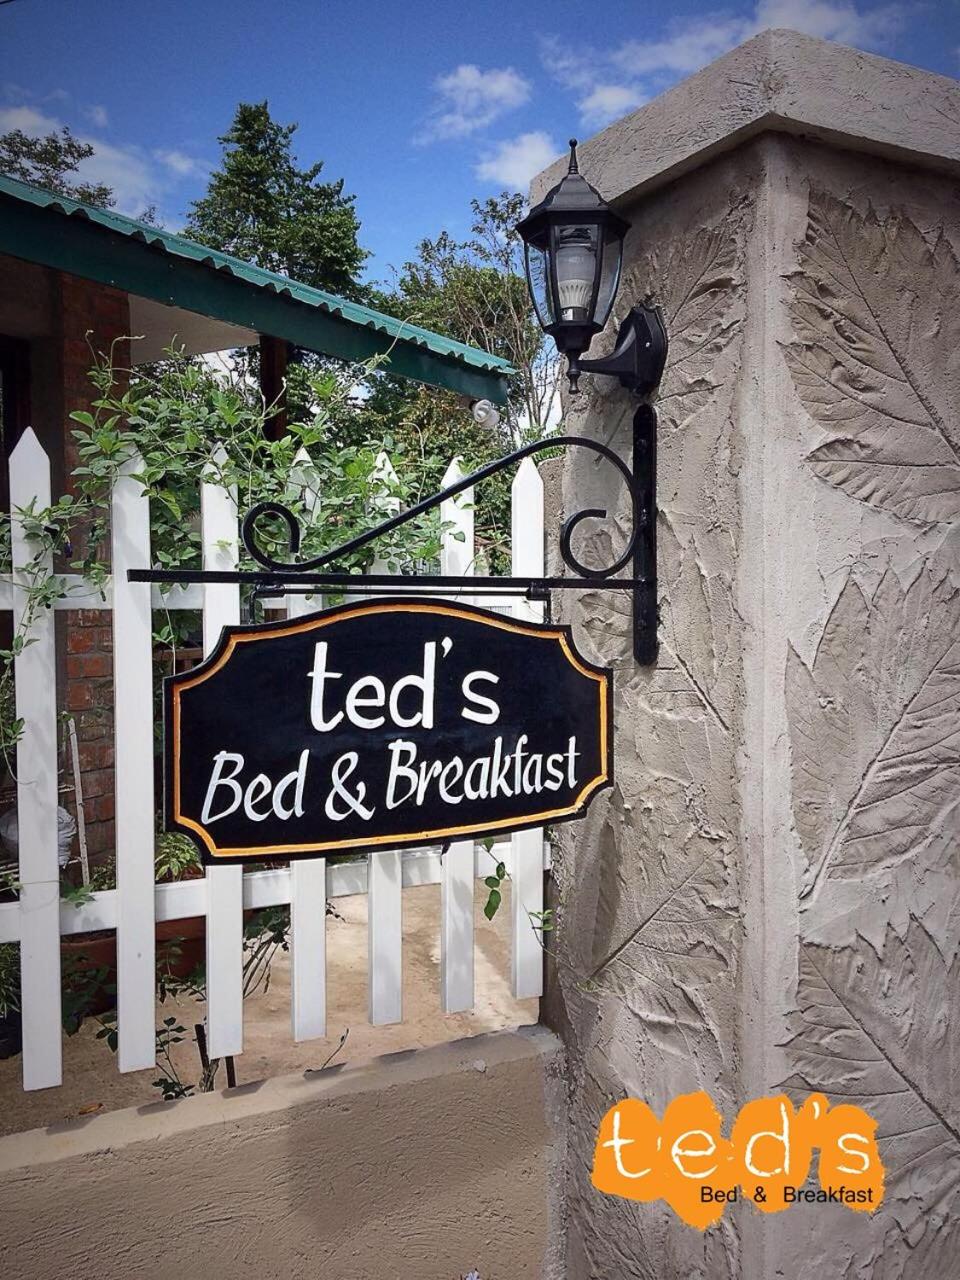 Ted's Bed & Breakfast